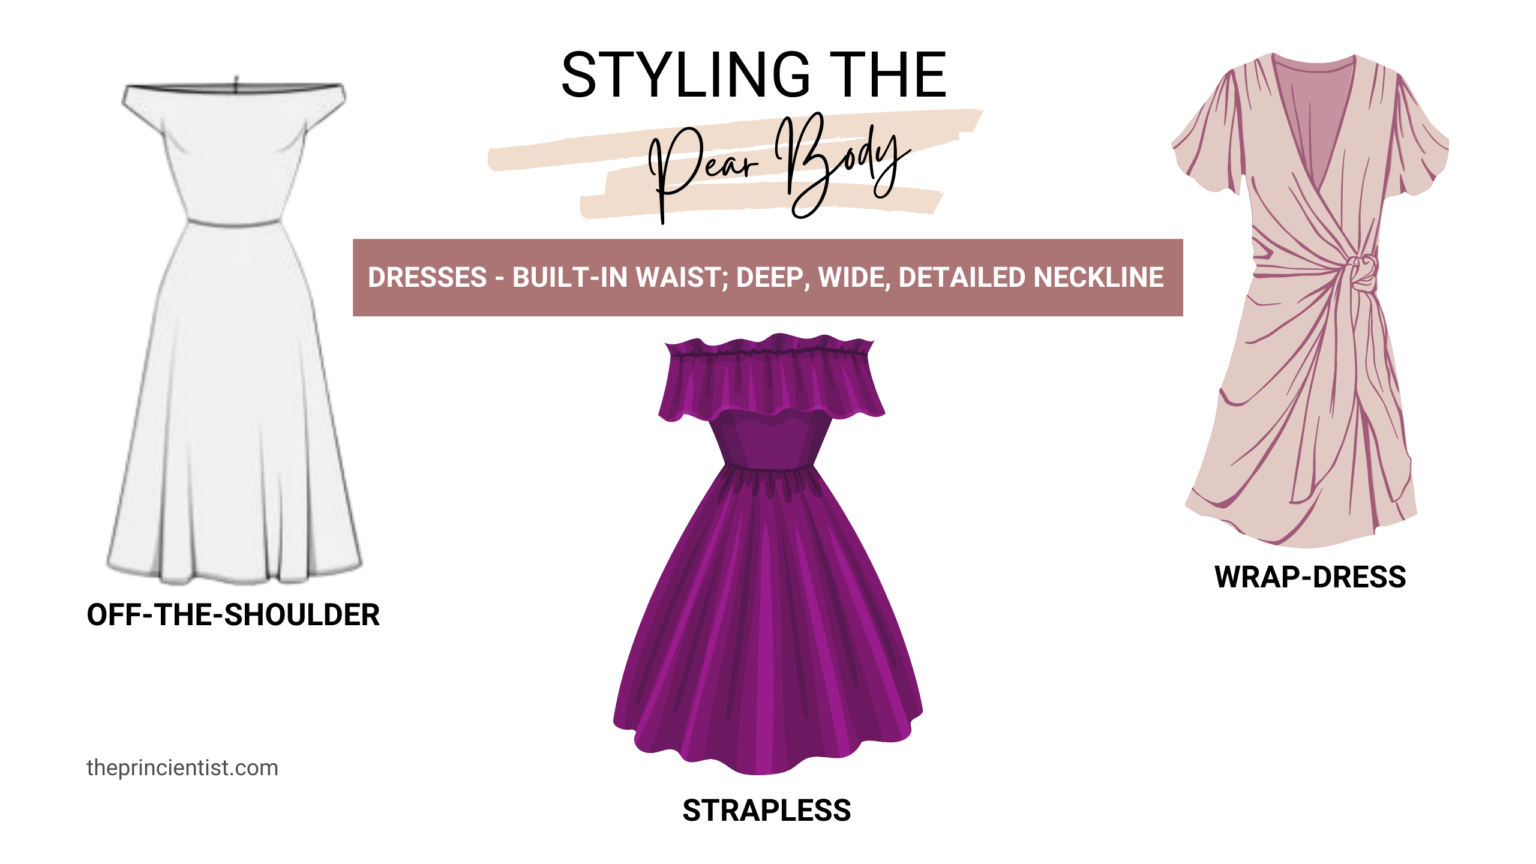 how to dress the pear shaped body - dresses for the pear body 1